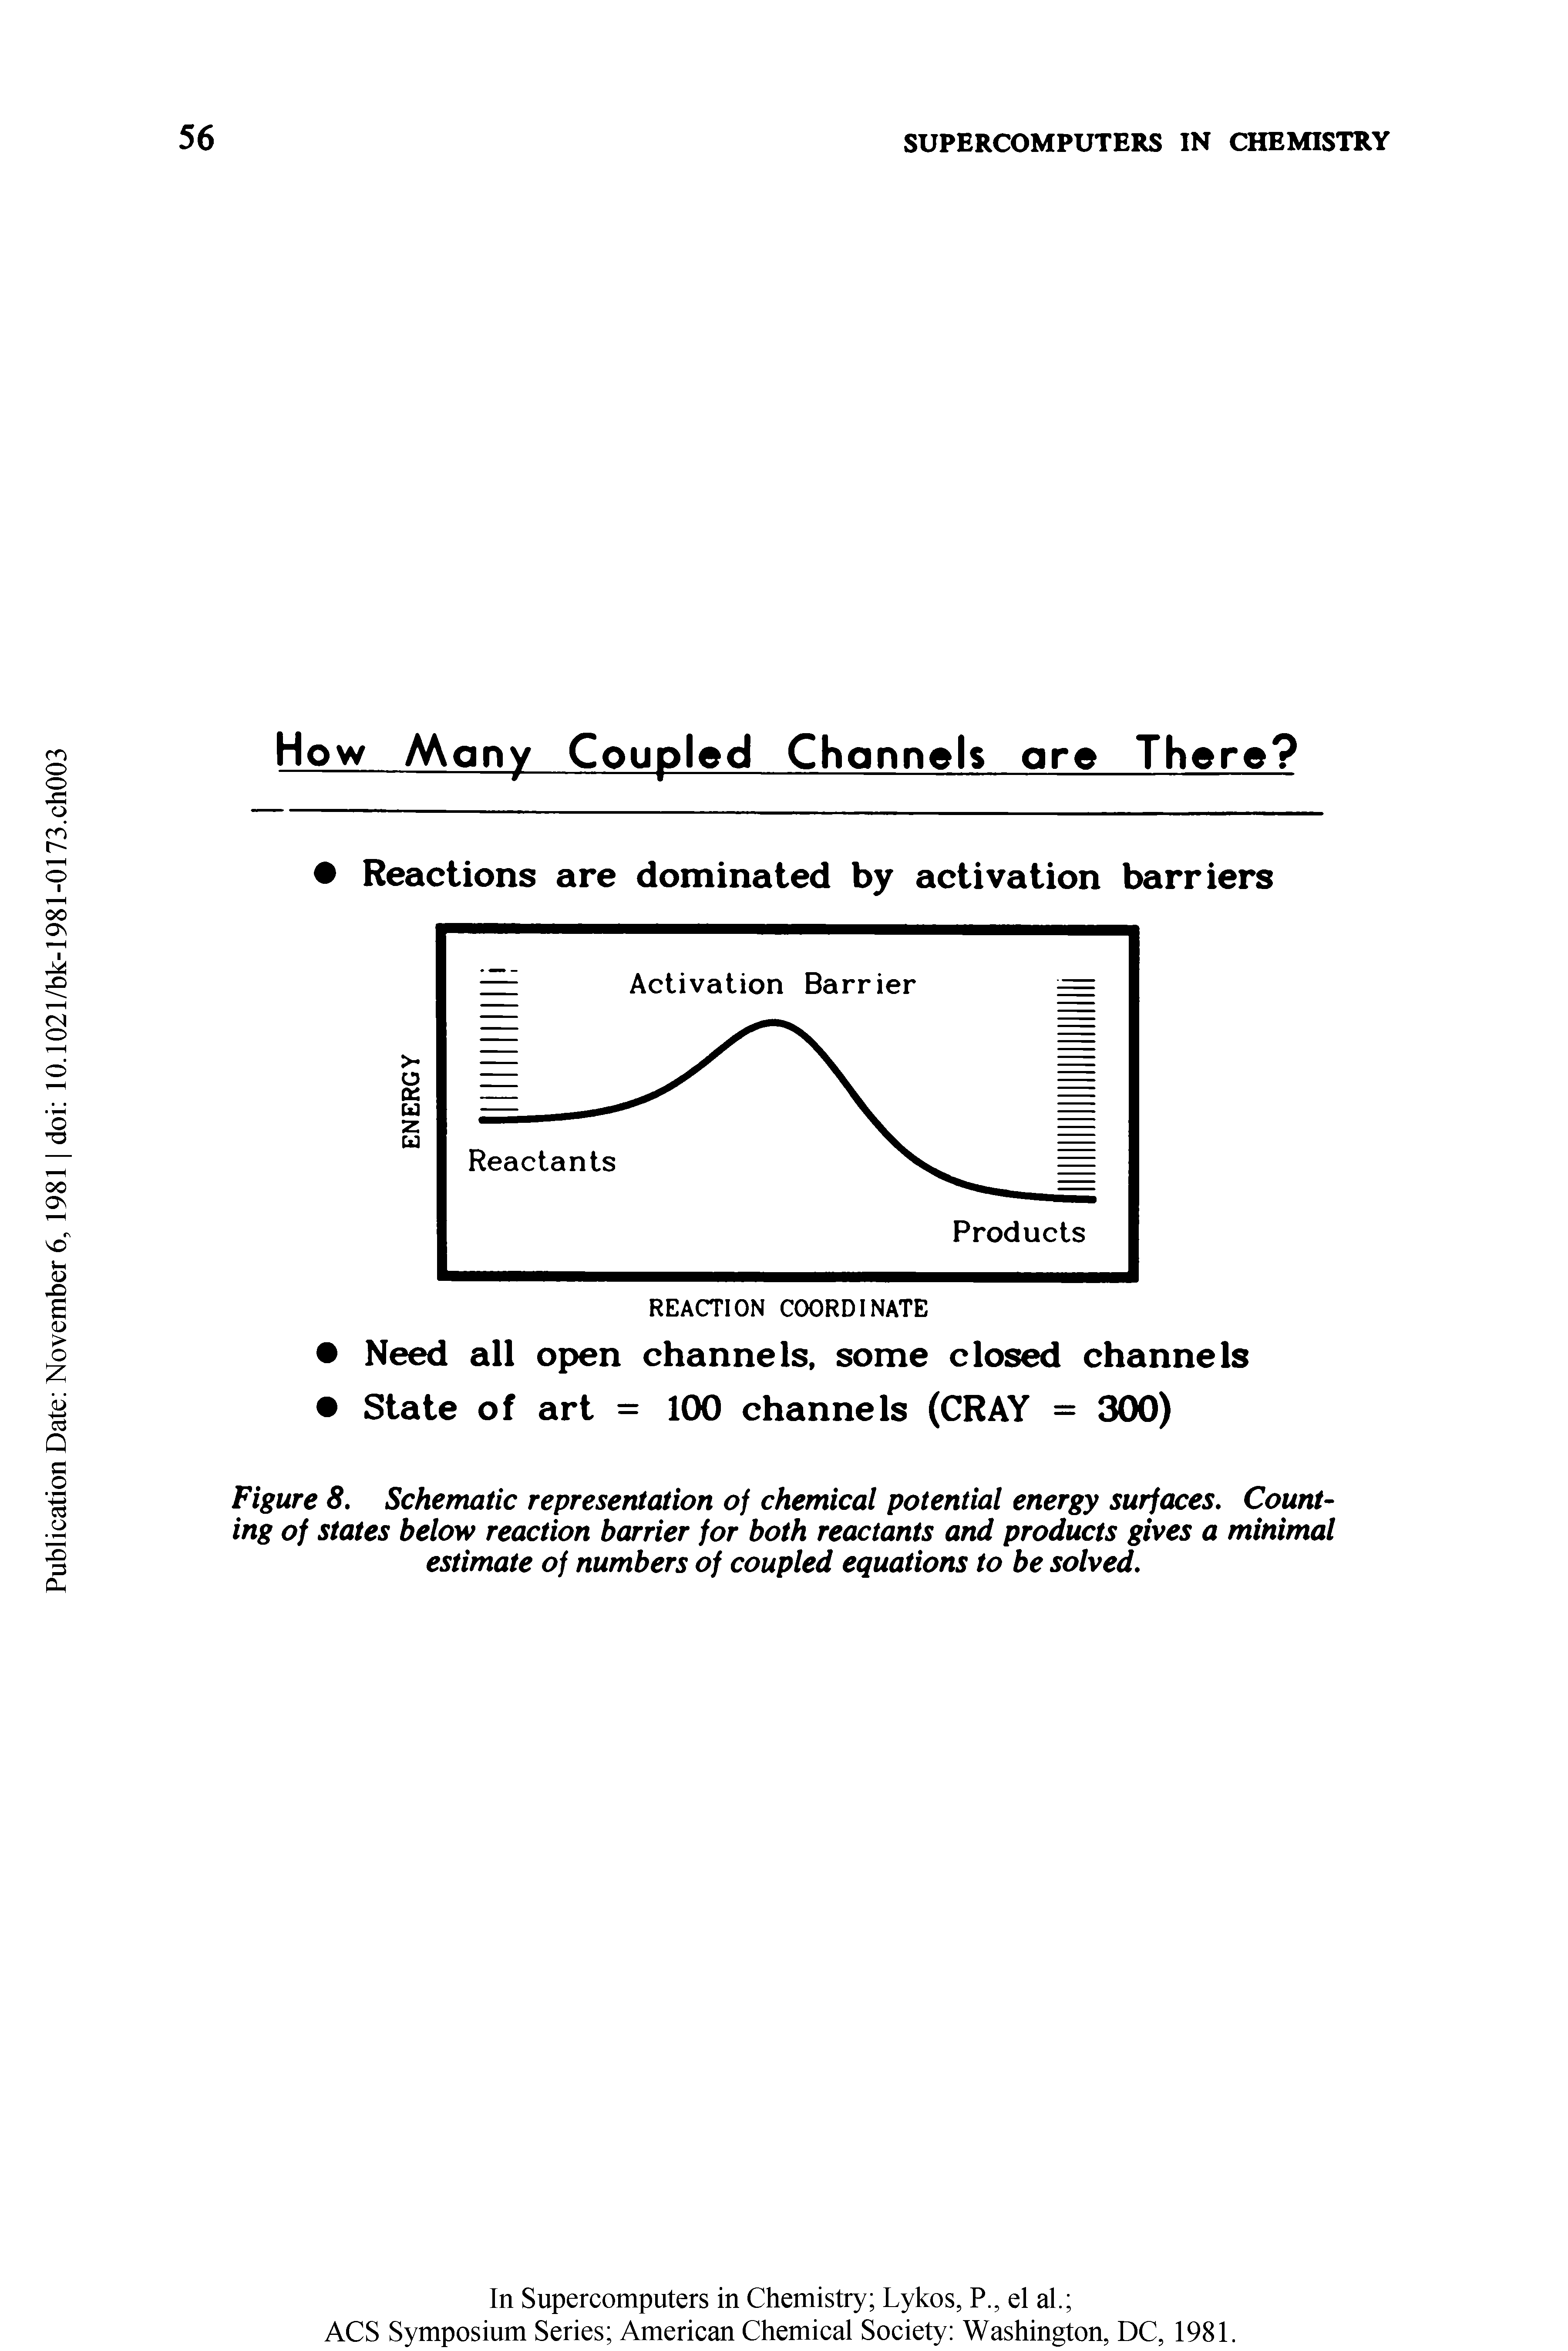 Figure 8. Schematic representation of chemical potential energy surfaces. Counting of states below reaction barrier for both reactants and products gives a minimal estimate of numbers of coupled equations to be solved.